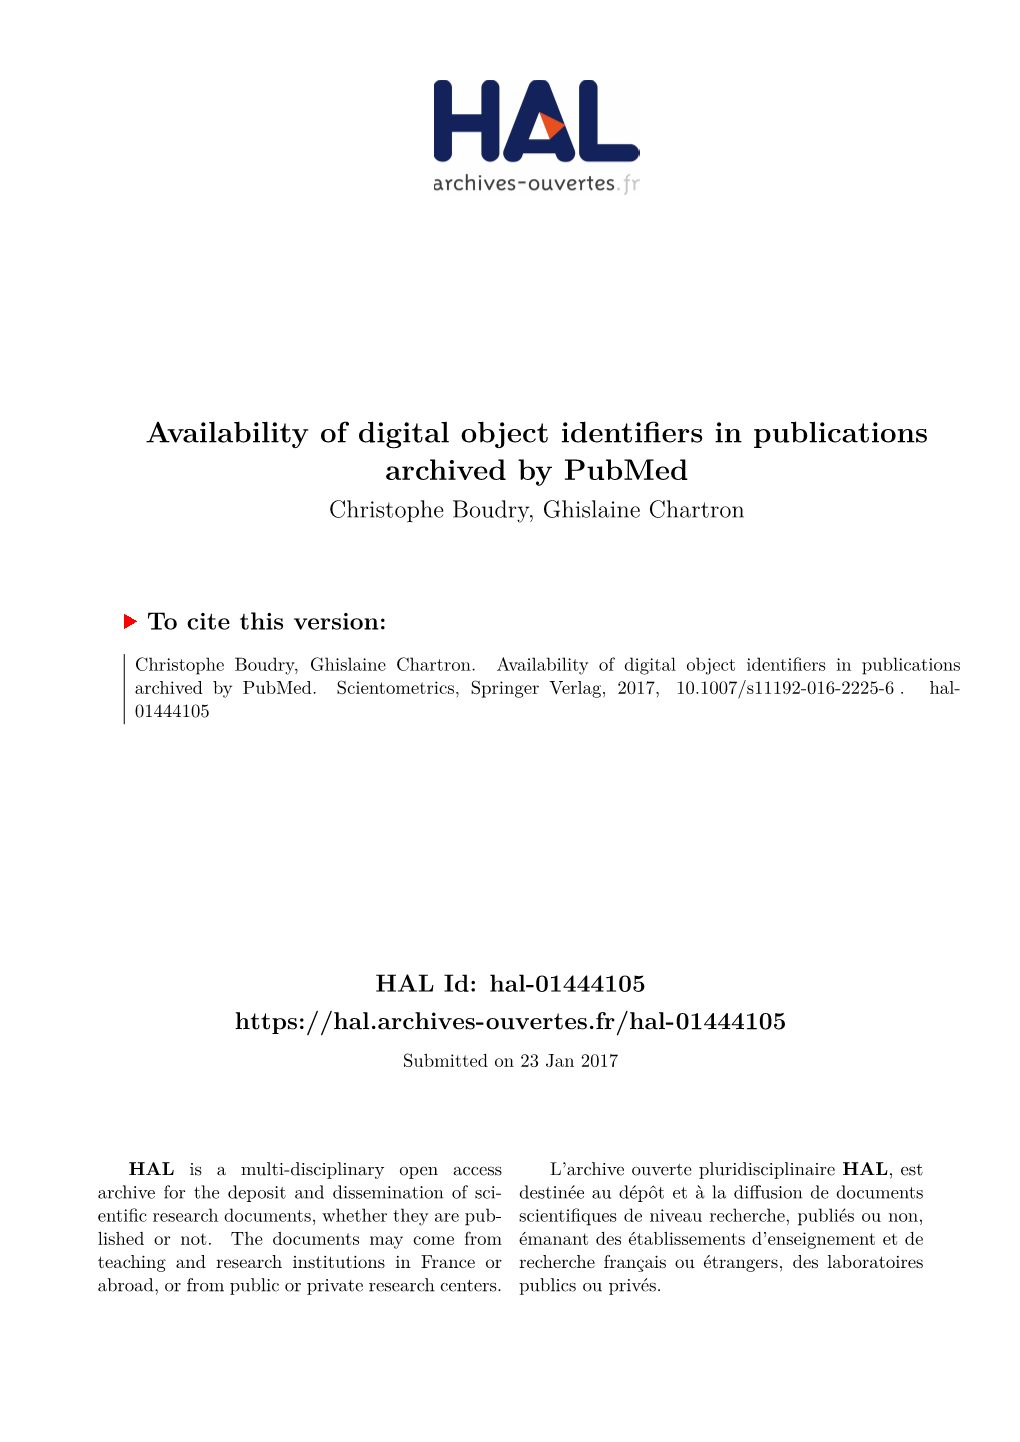 Availability of Digital Object Identifiers in Publications Archived by Pubmed Christophe Boudry, Ghislaine Chartron